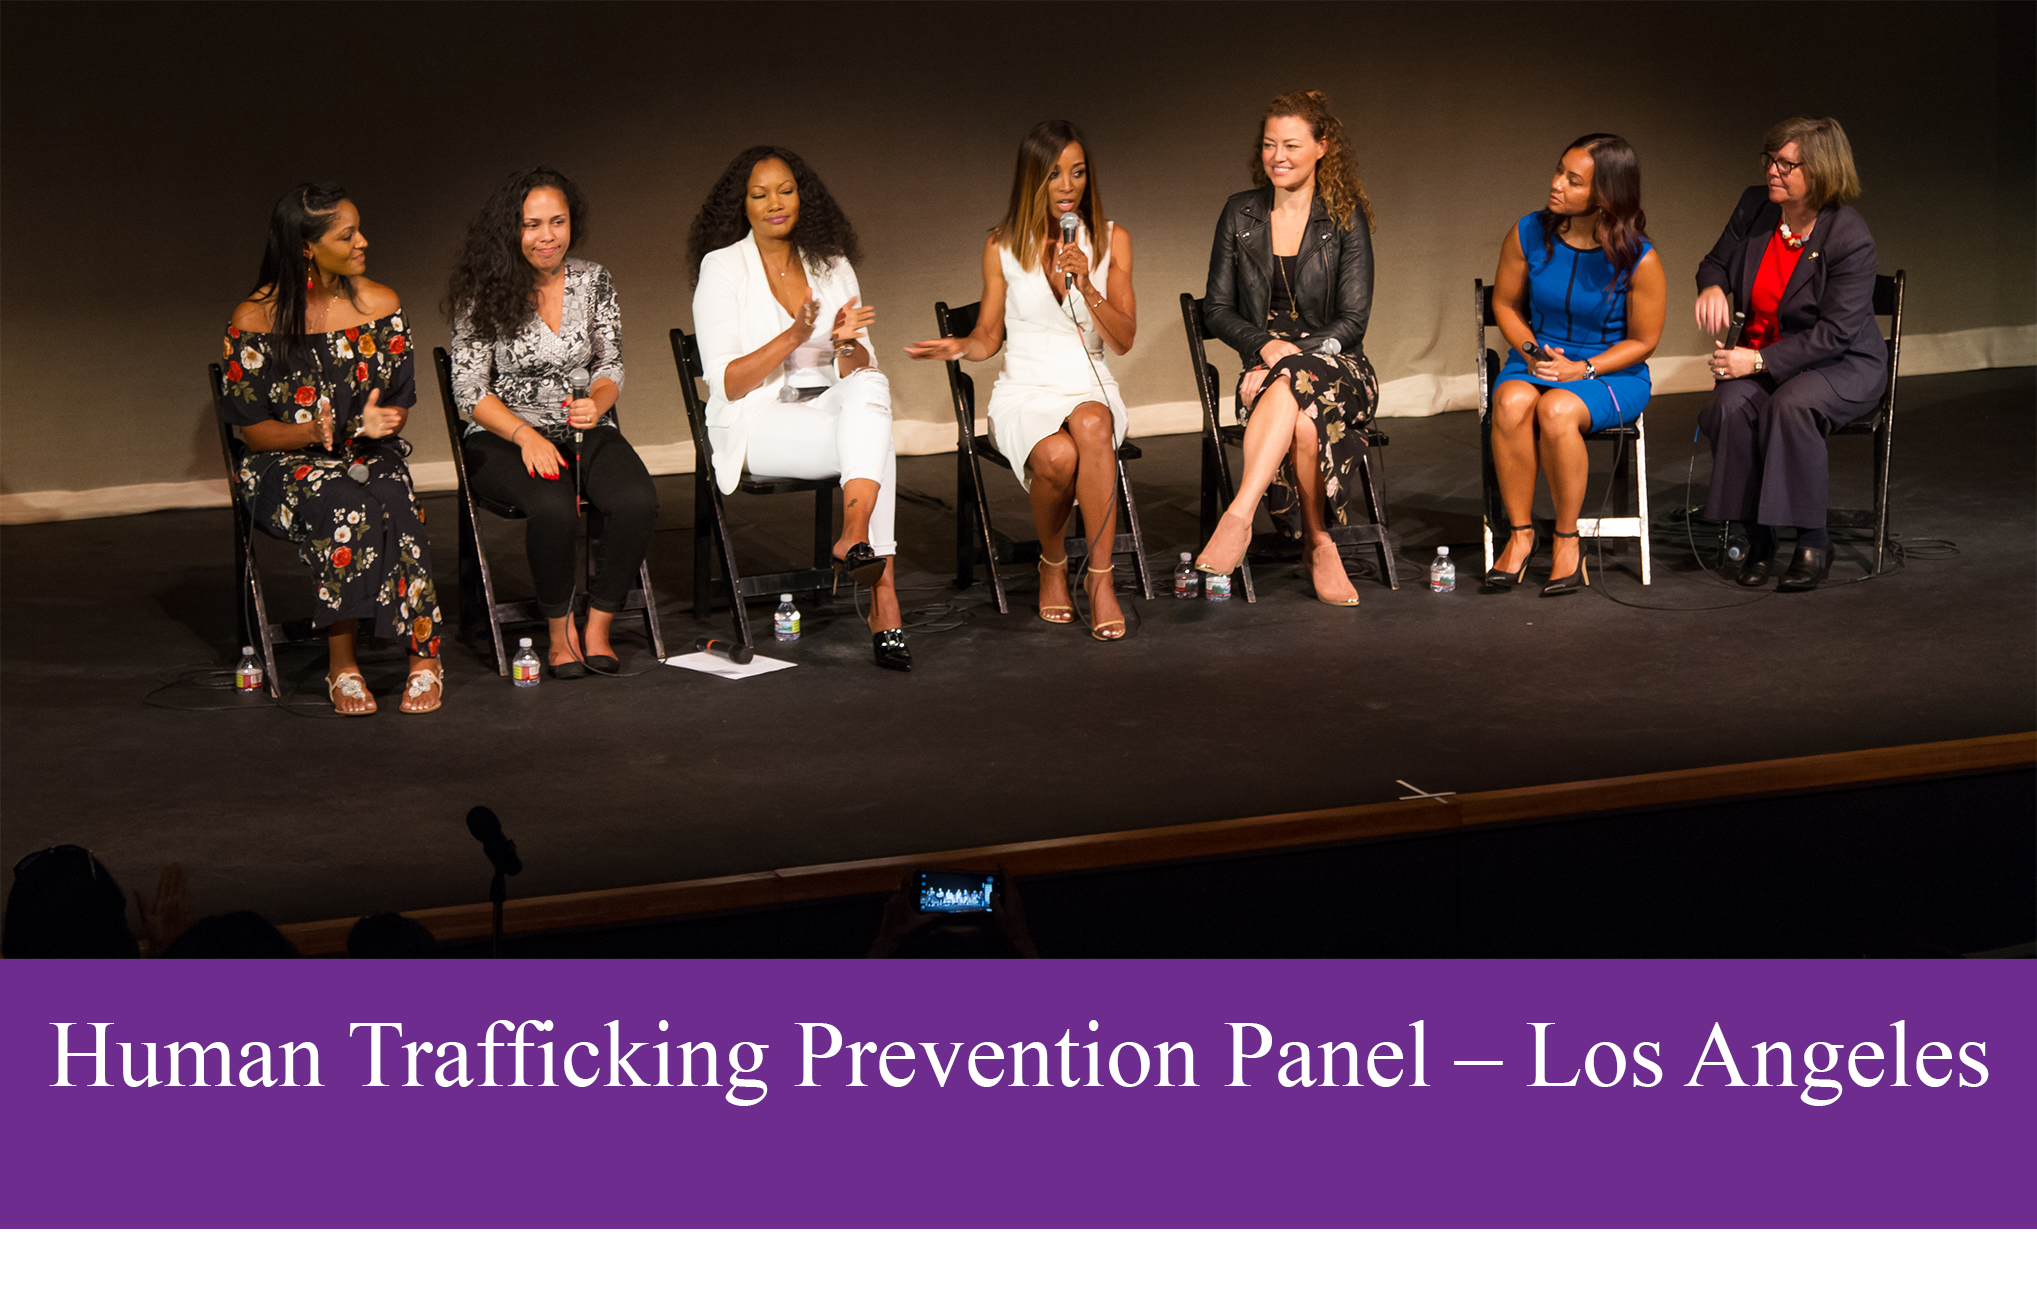 S.H.A.U.N. Foundation for Girls Human Trafficking Prevention Panel in Los Angeles - video link